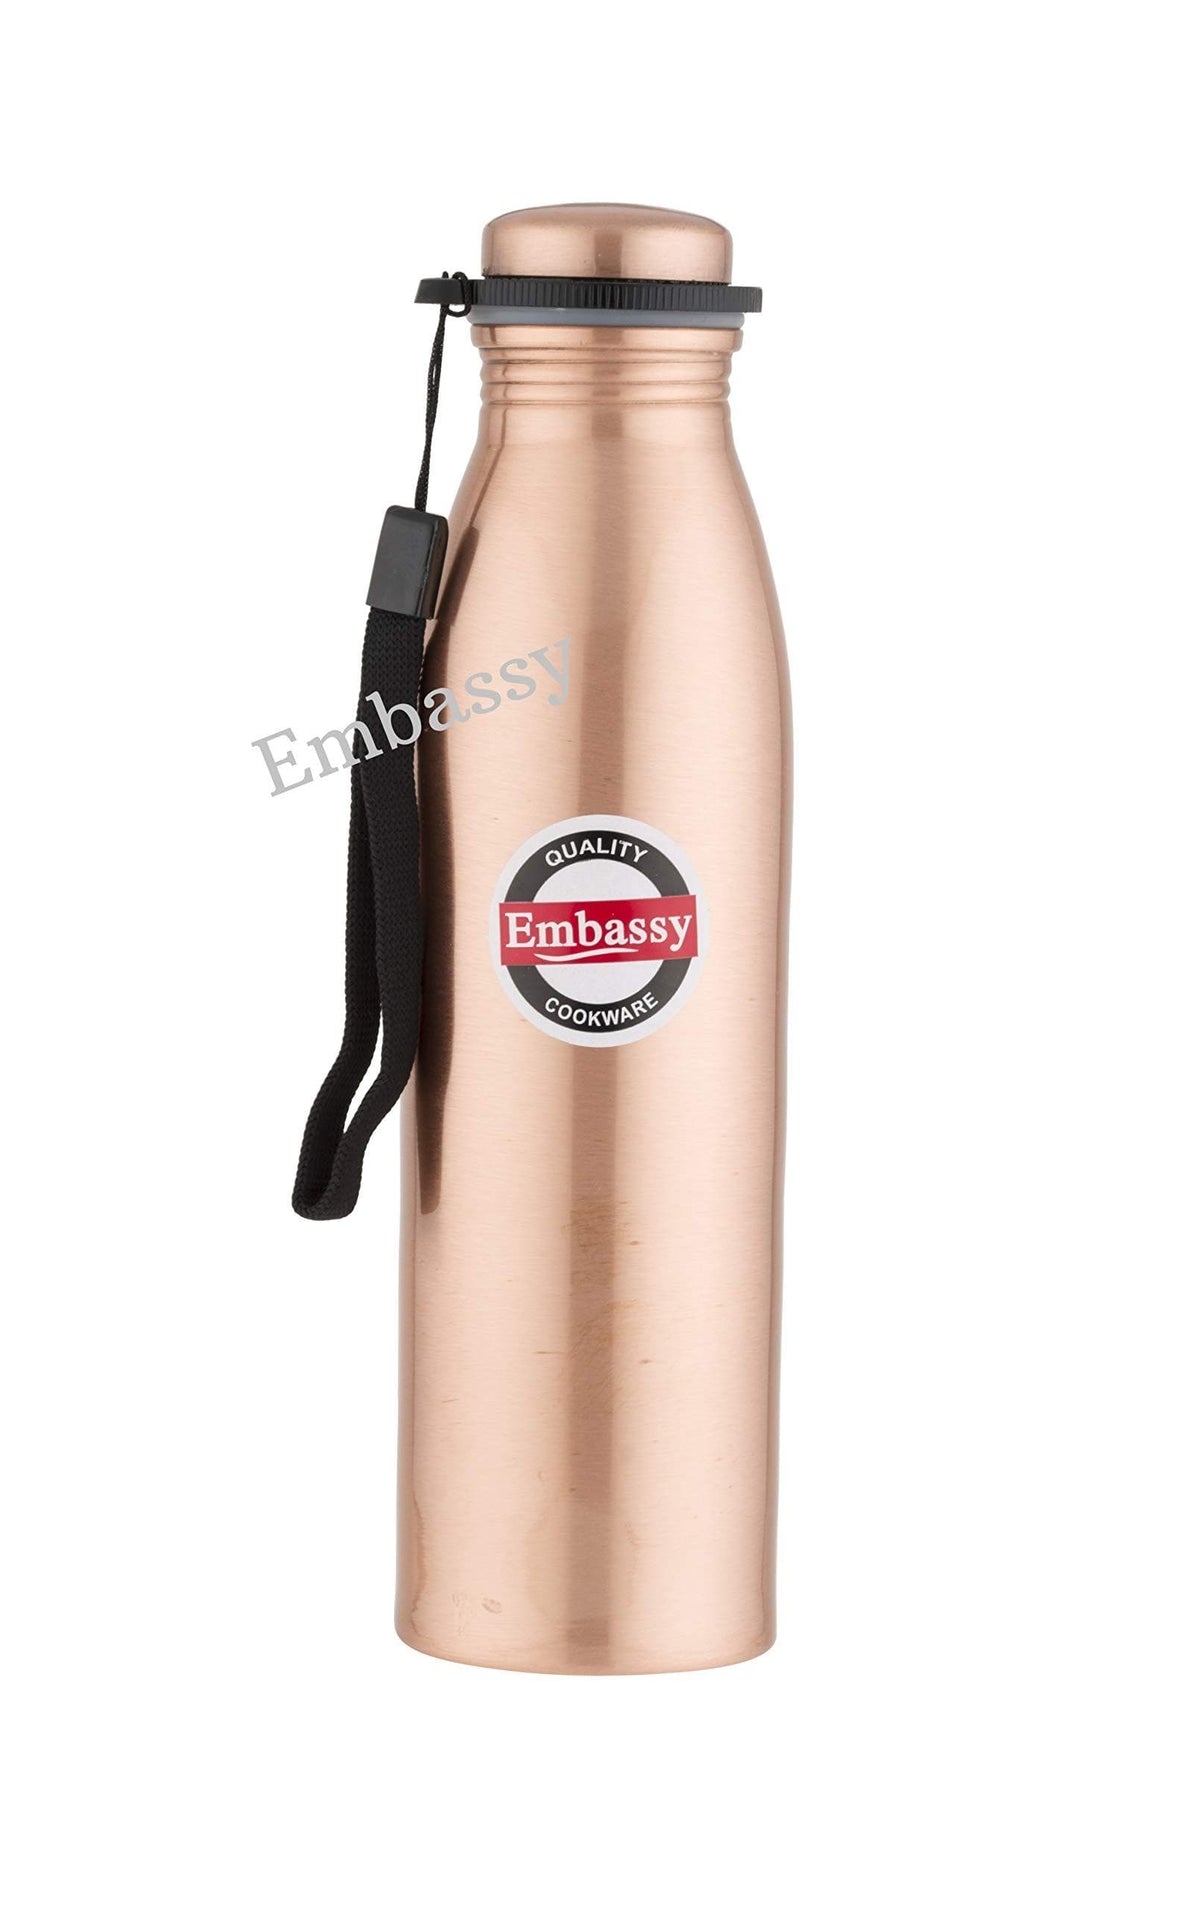 Embassy Premium Copper Water Bottle, Plain, 600 ml, Pack of 1 - Leak-Proof, Jointless and Pure Copper - KITCHEN MART